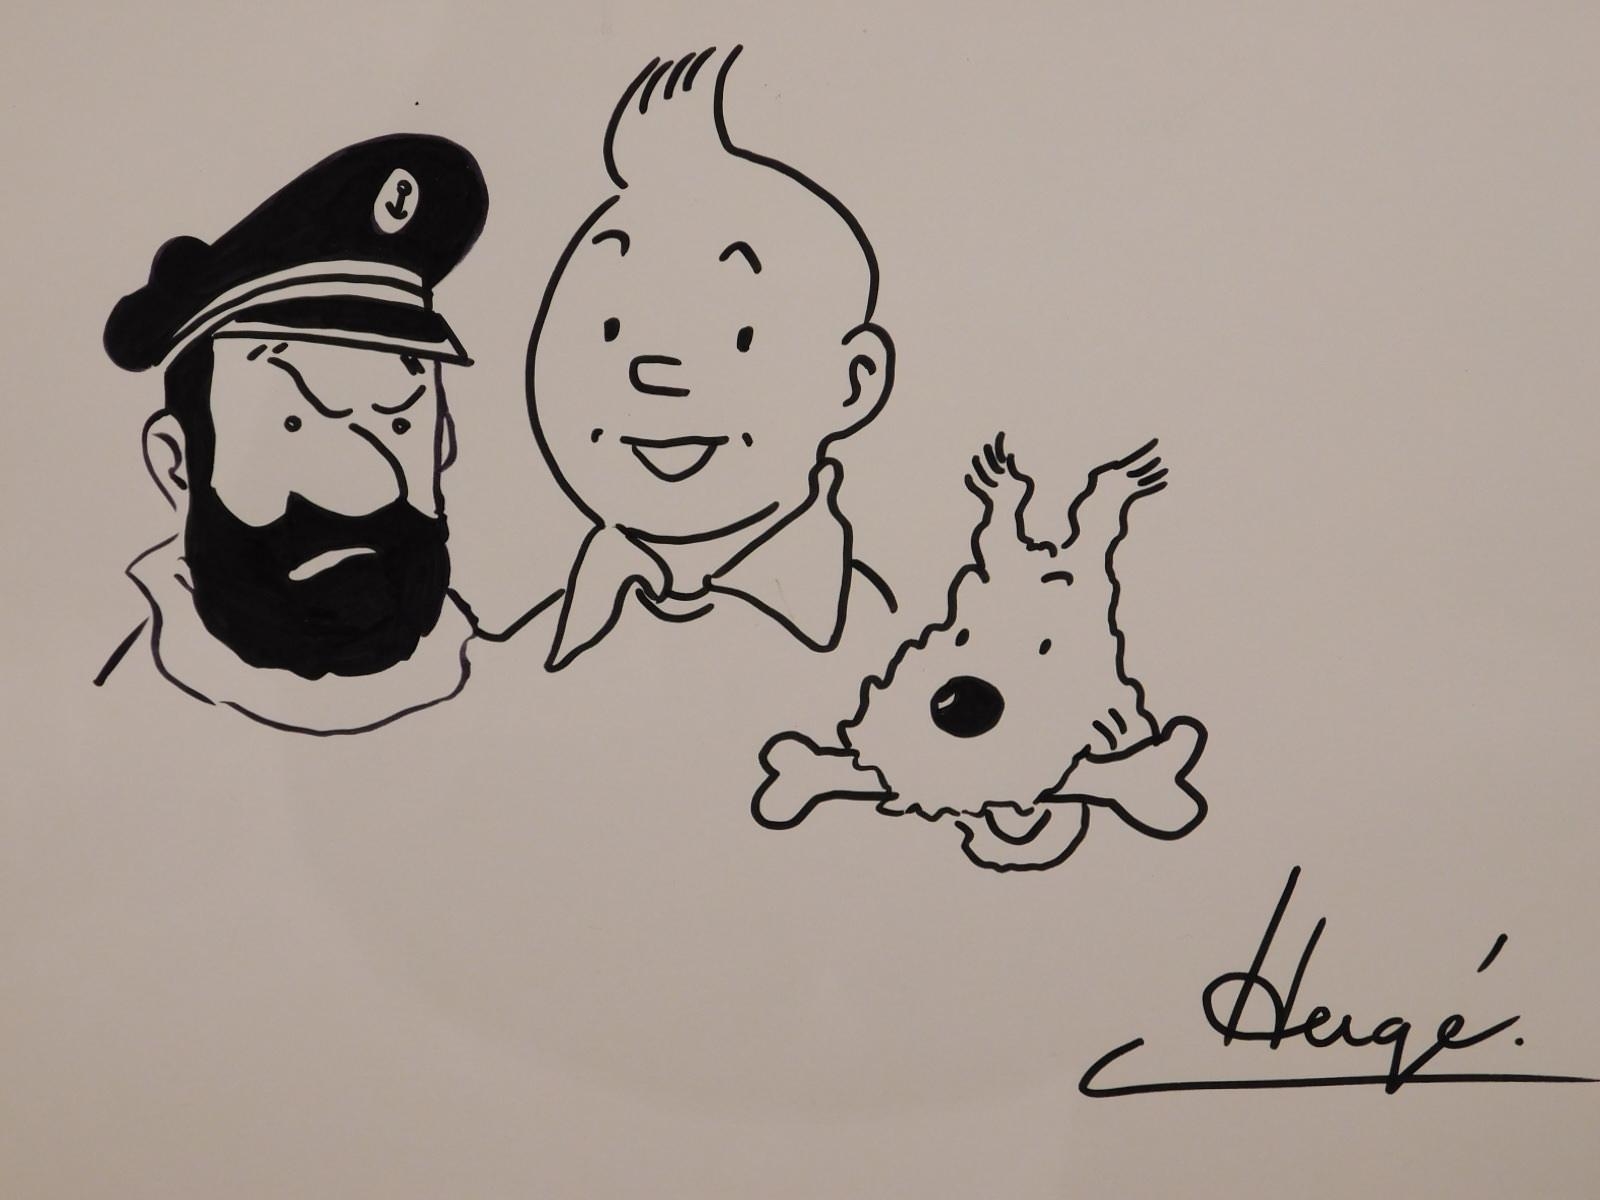 Artwork by Hergé, Tintin, Captain Haddock and Snowy, Made of Ink on paper